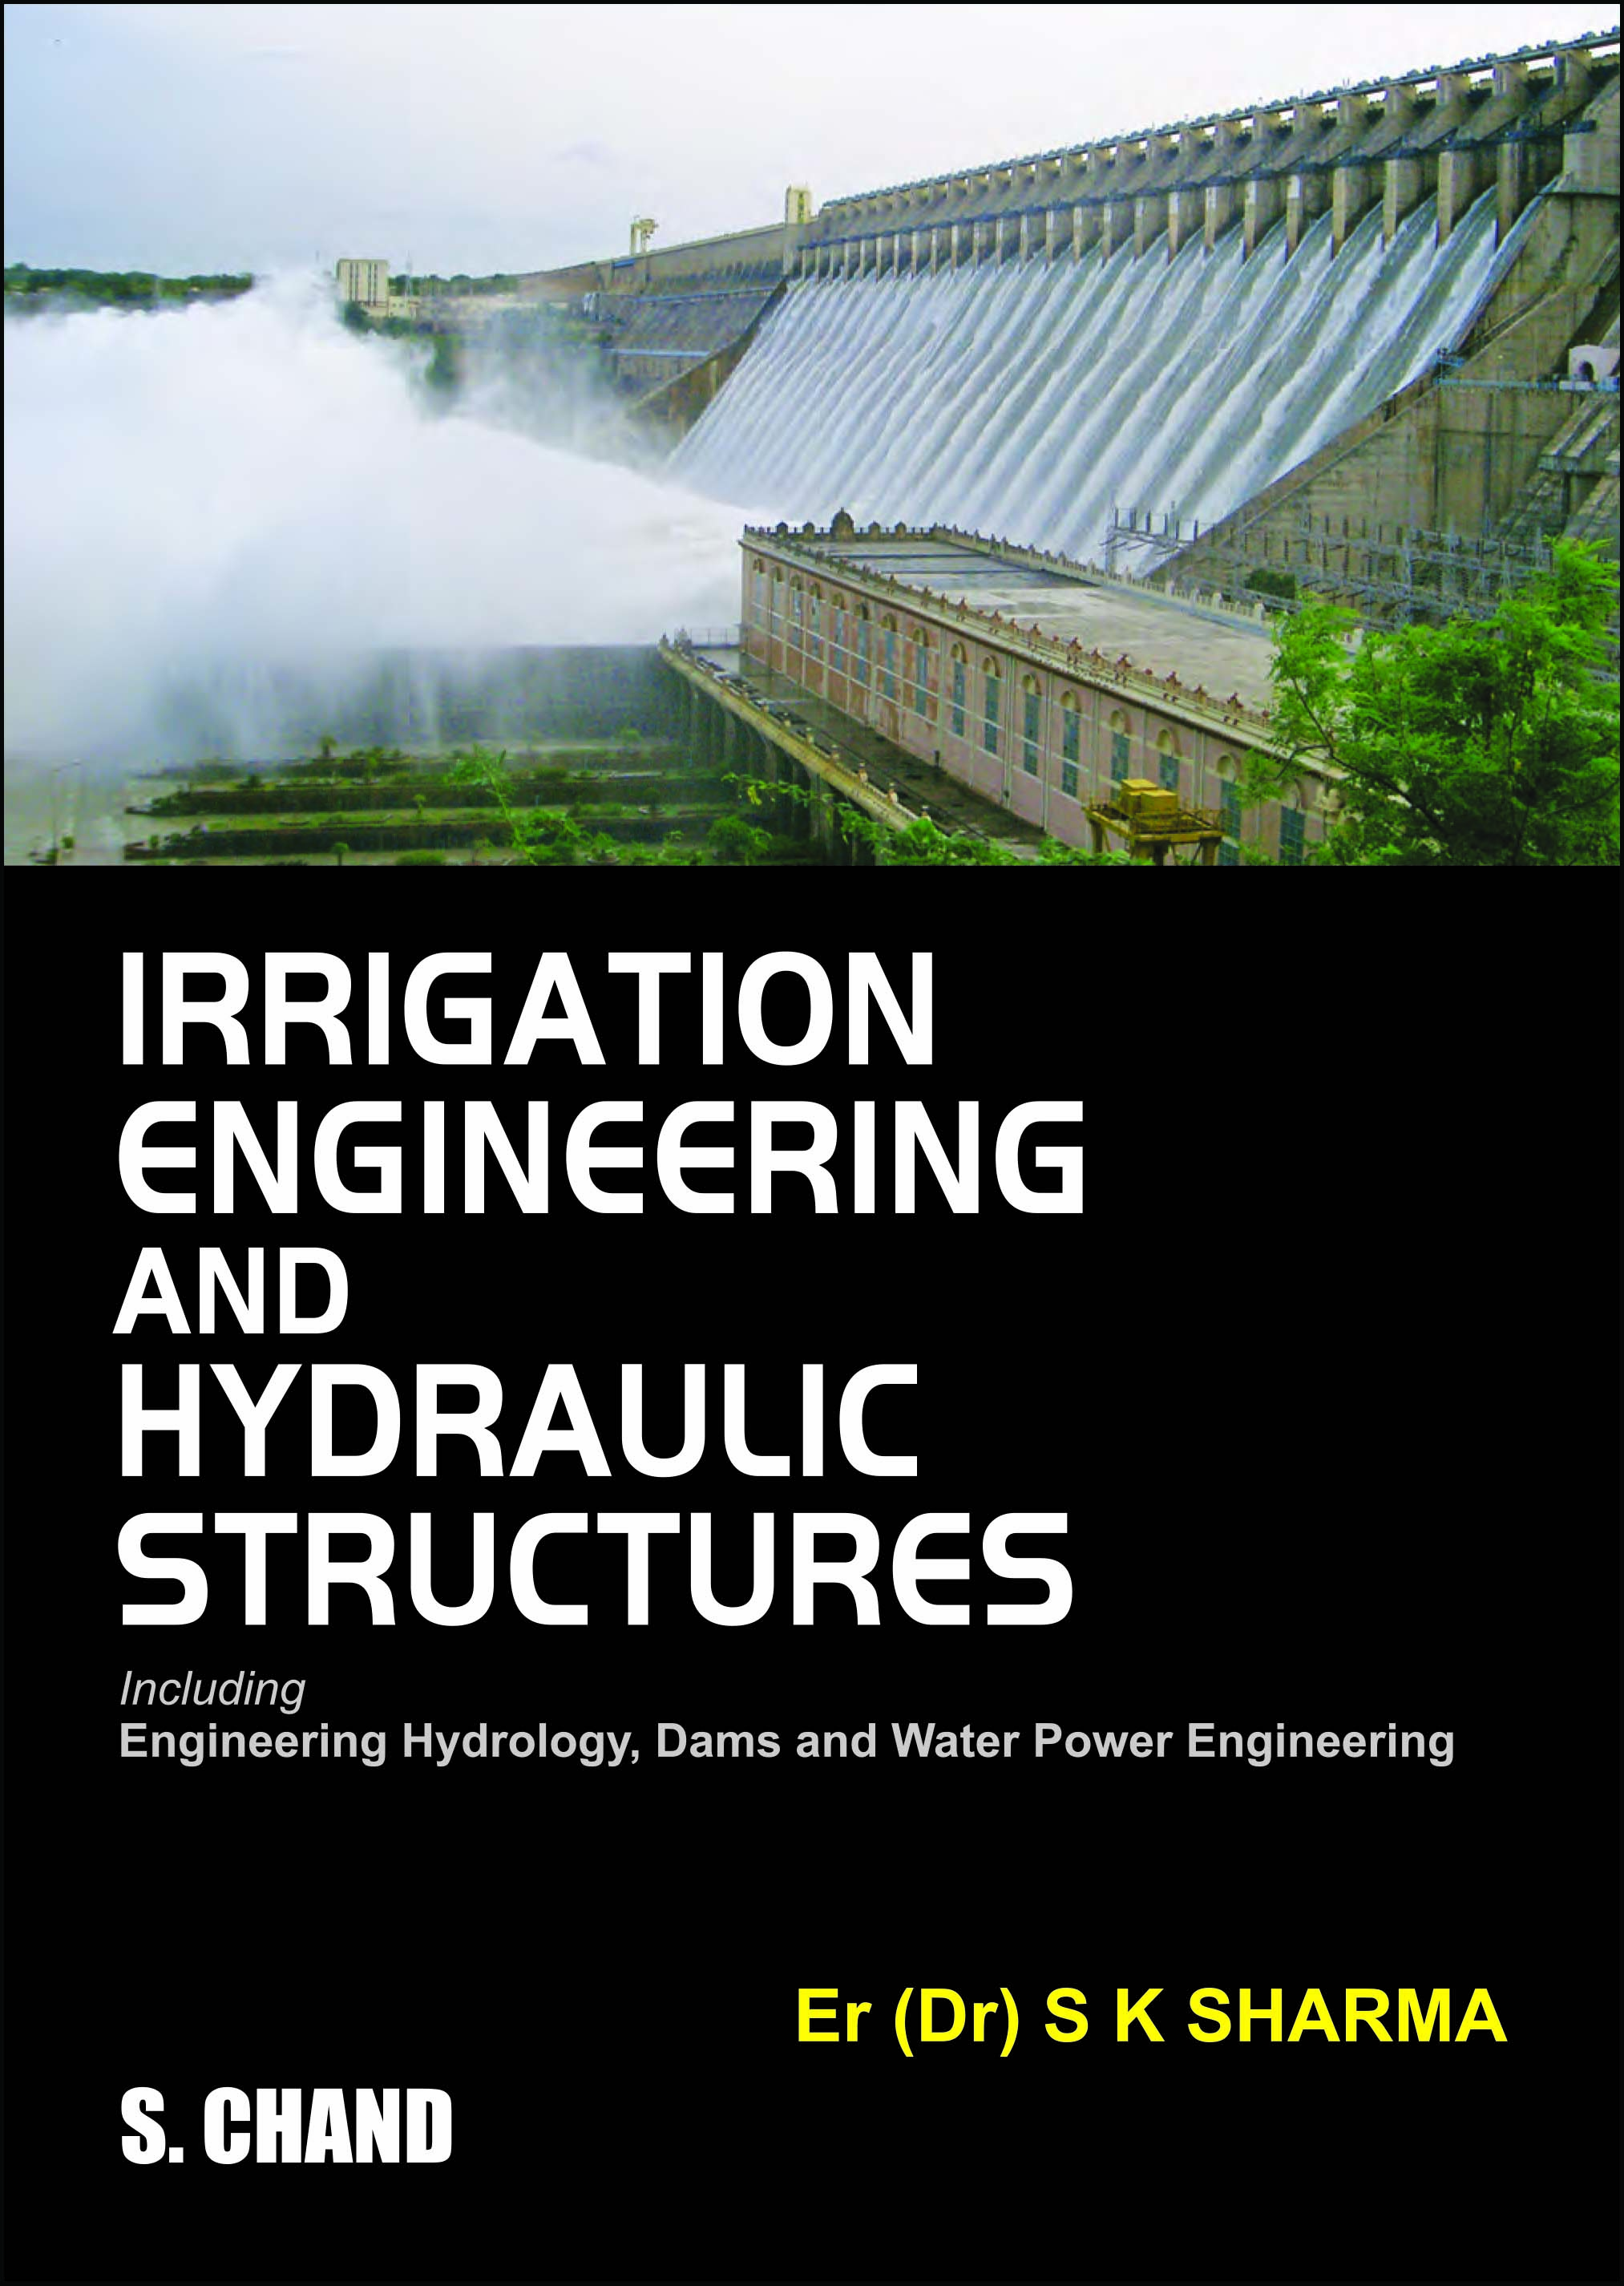 phd thesis in hydrology pdf